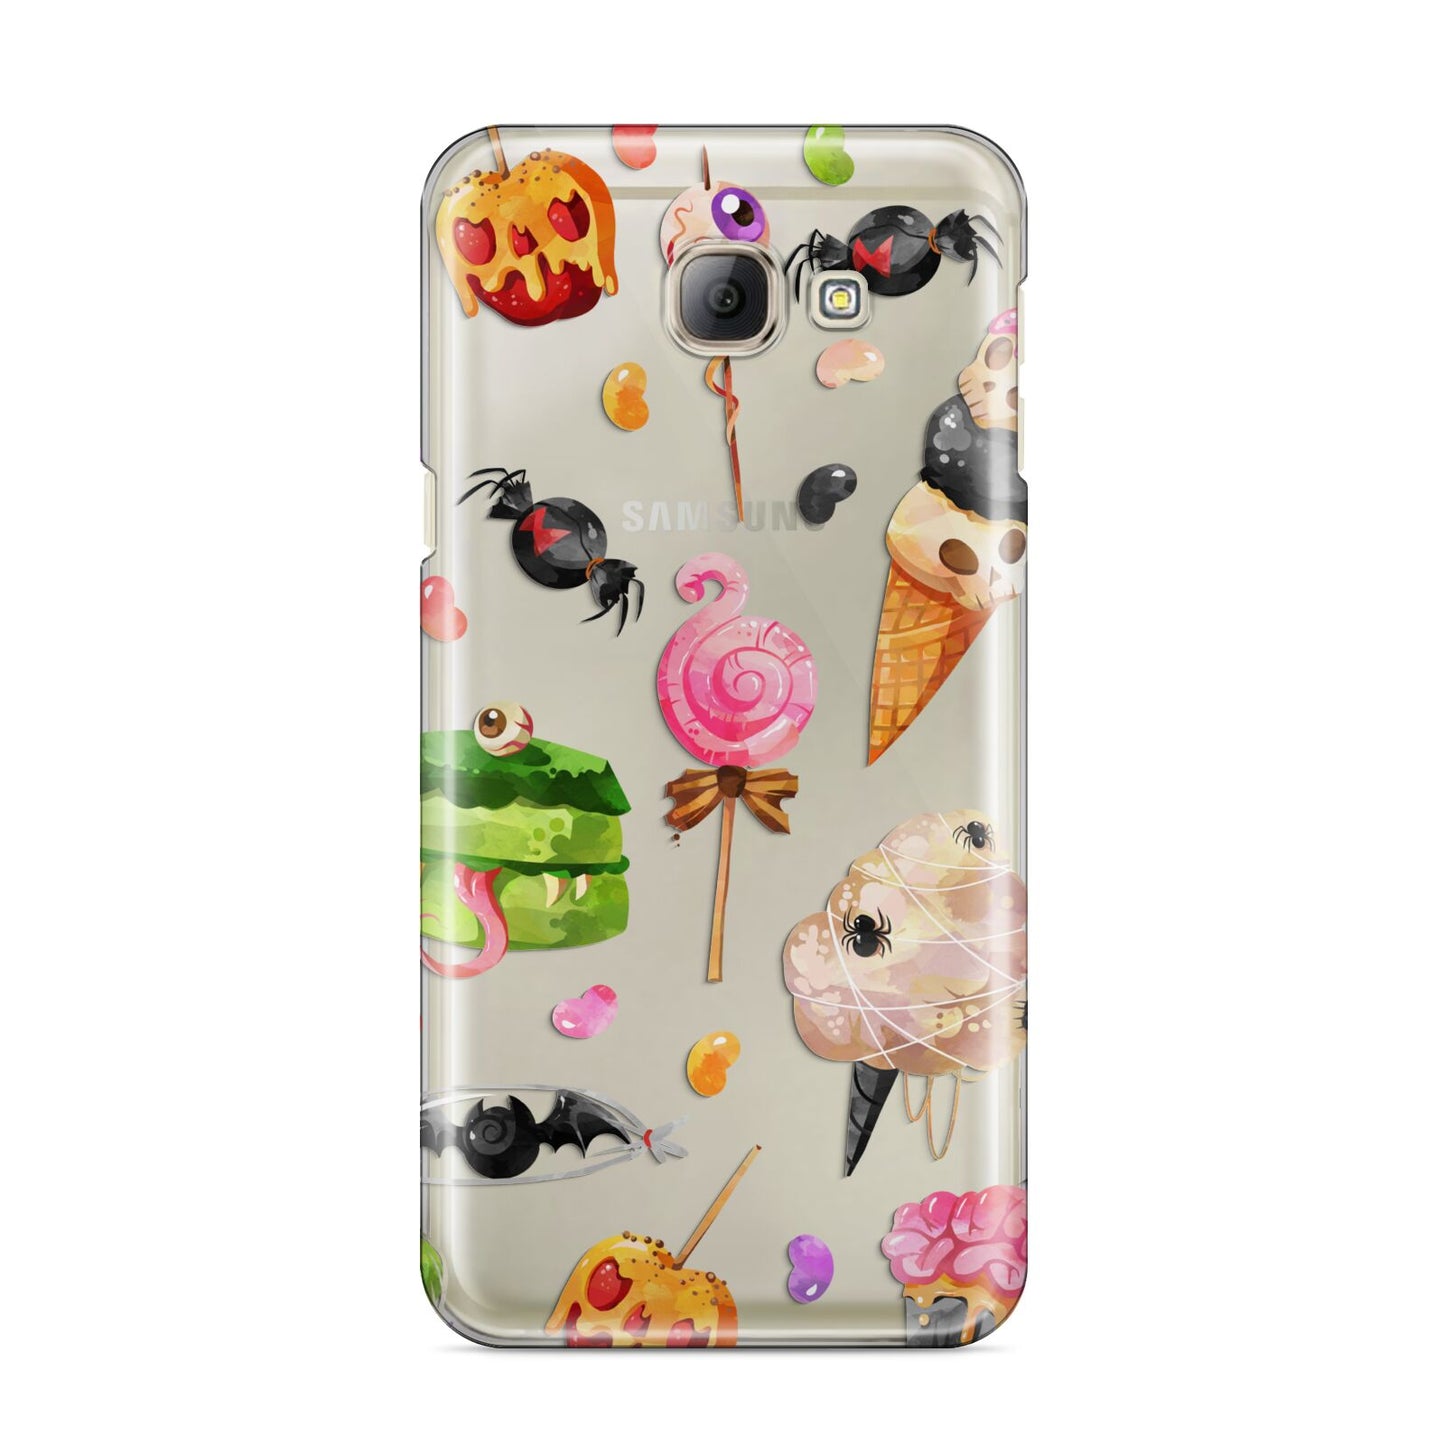 Halloween Cakes and Candy Samsung Galaxy A8 2016 Case